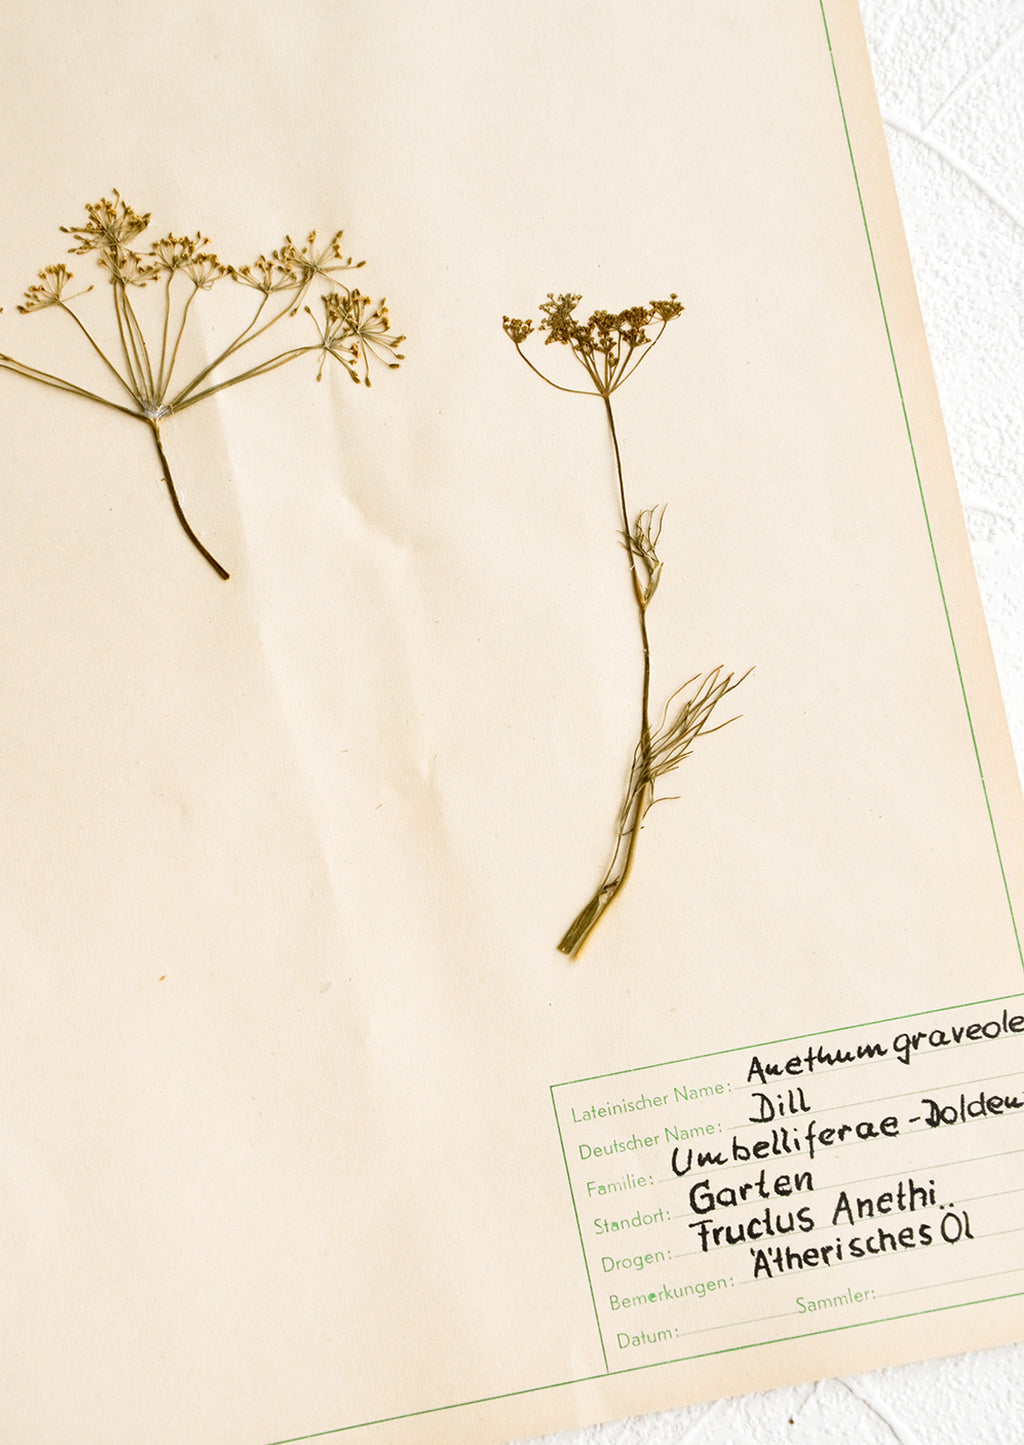 2: Dried dill specimen preserved on paper with handwritten description